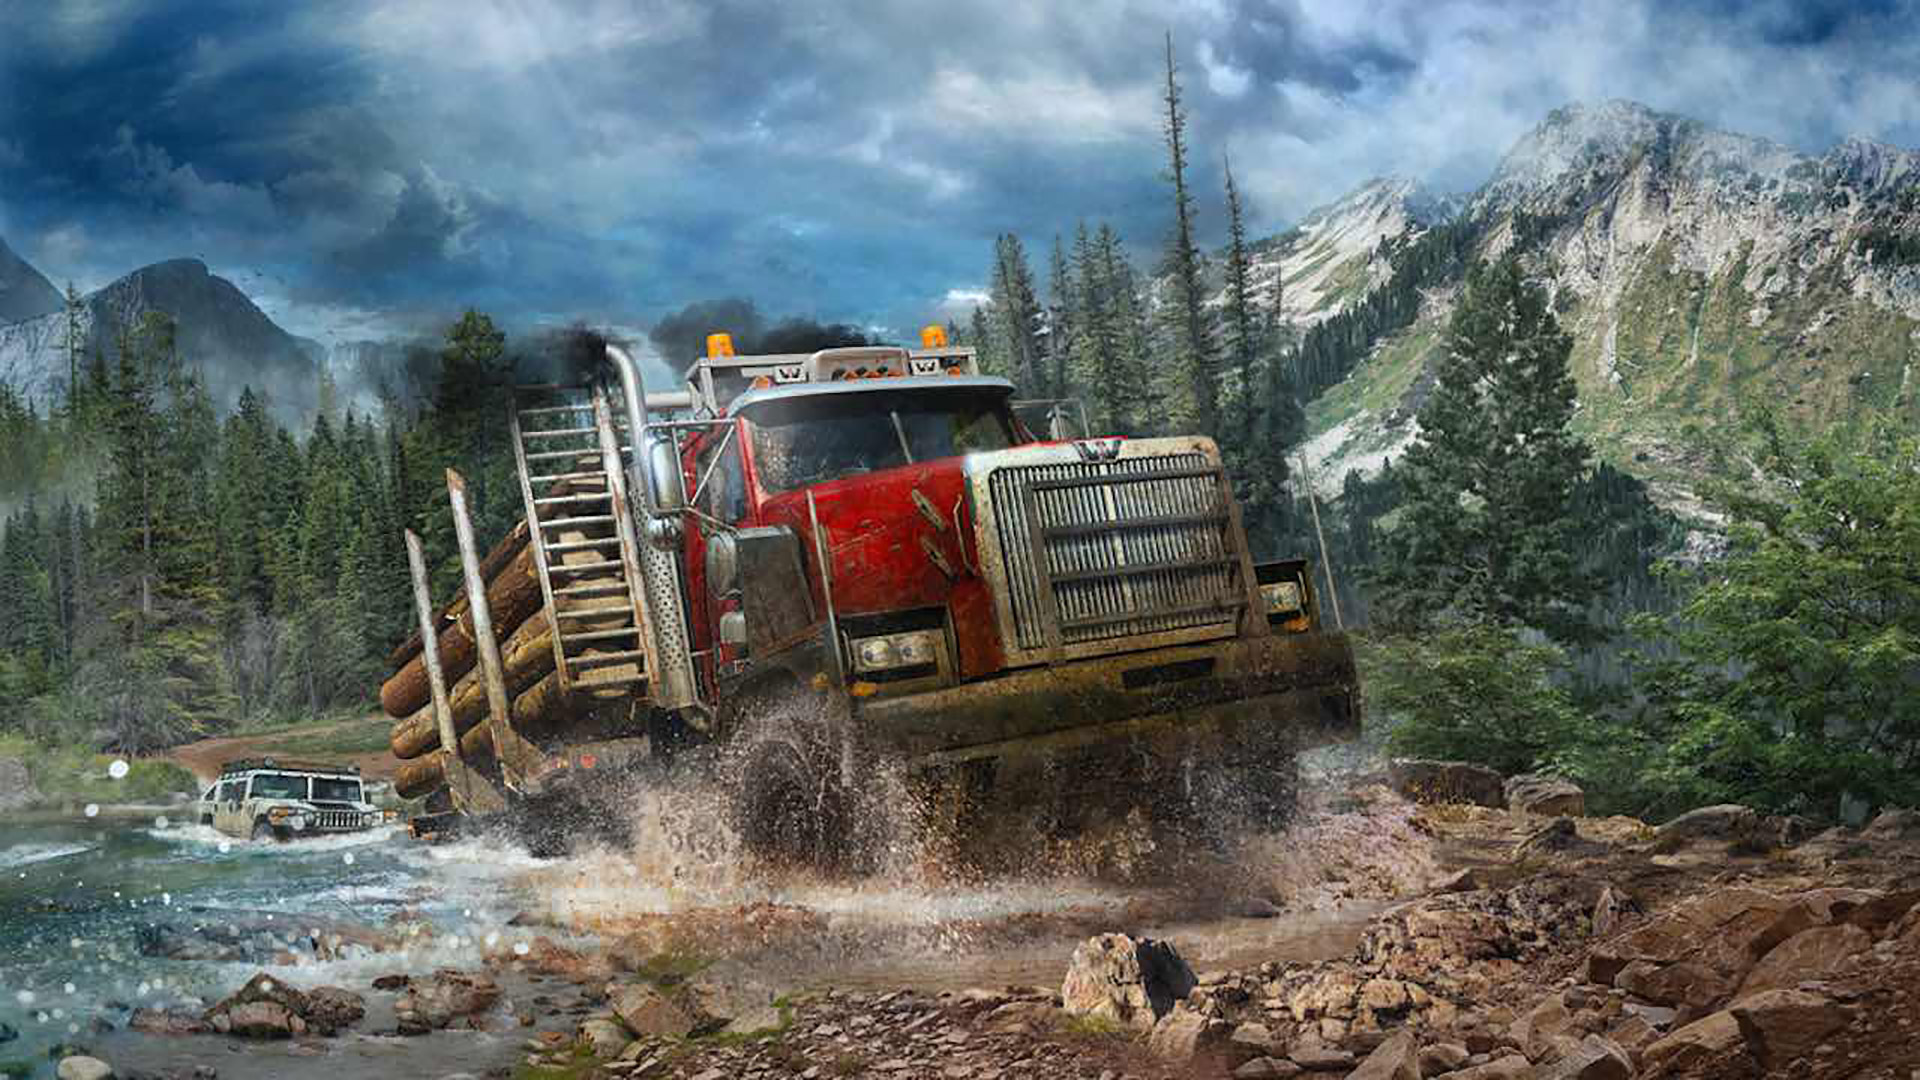 spintires mudrunner ps4 review